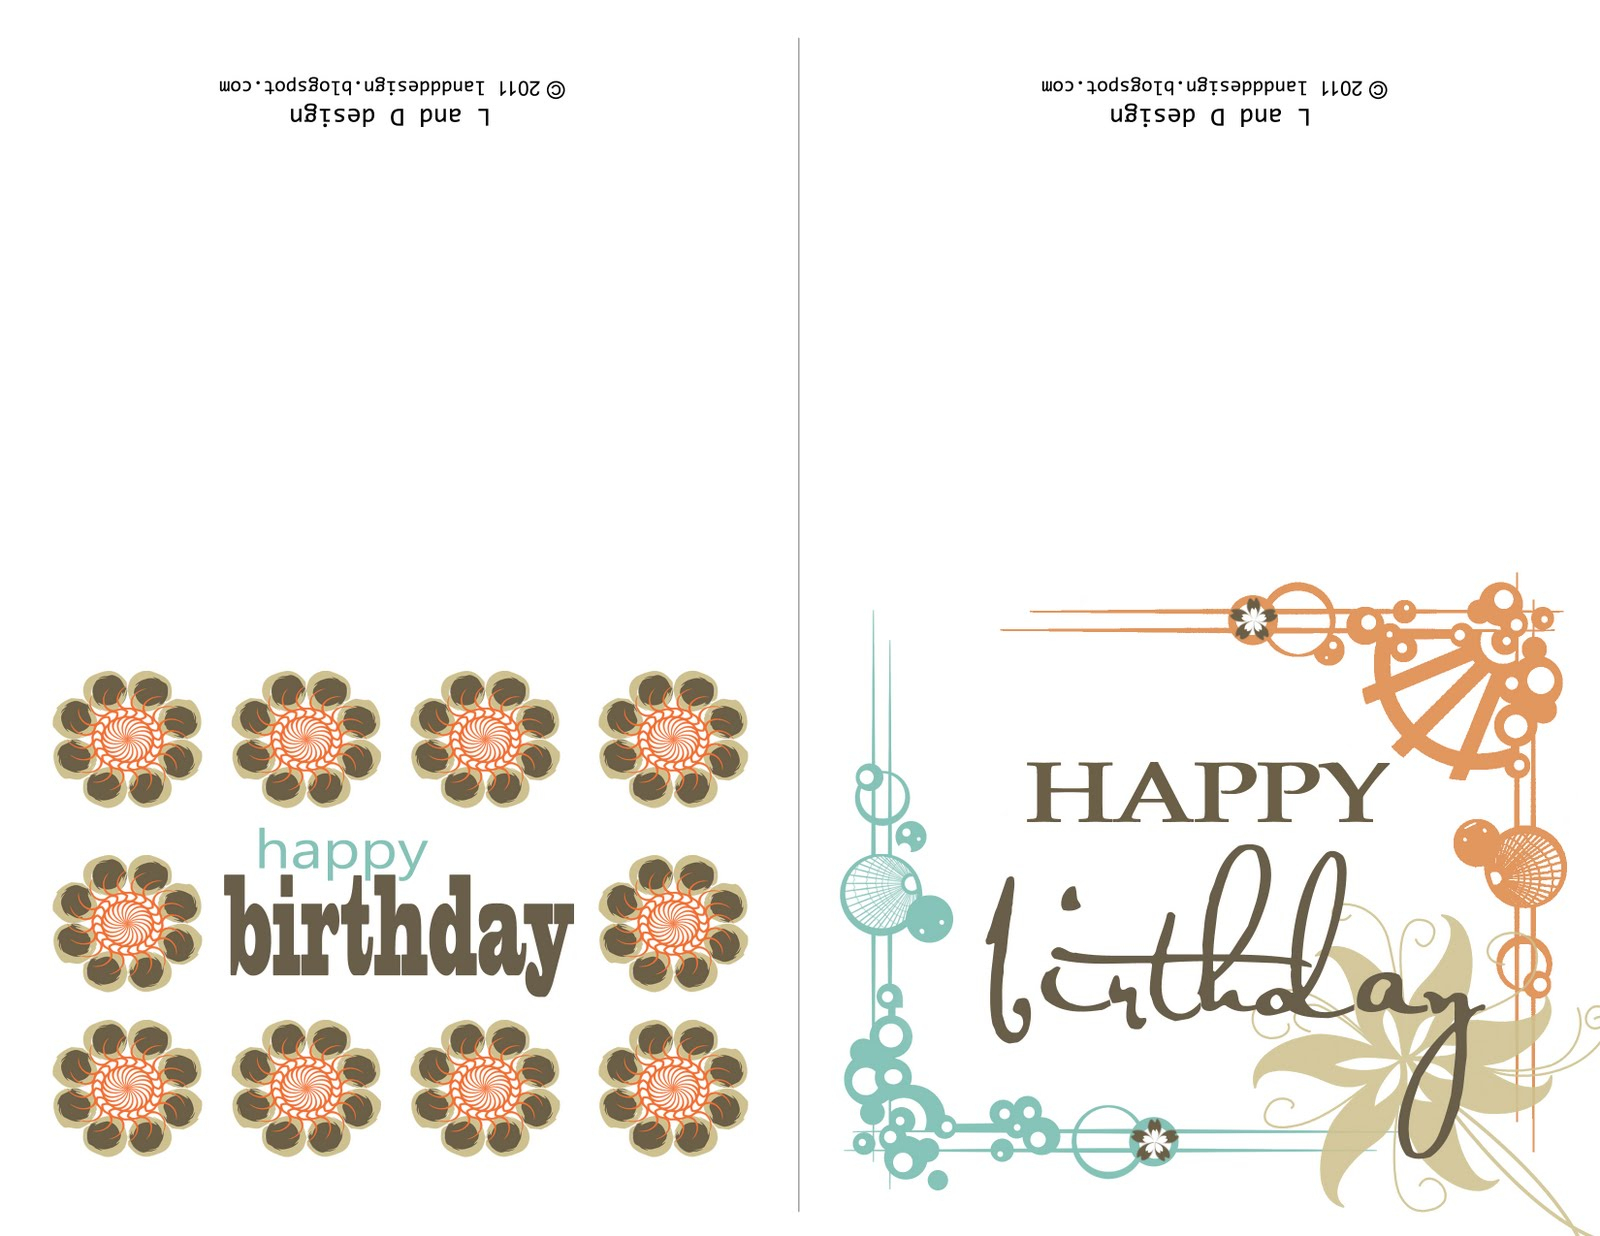 Funny Happy Birthday Cards To Print Out Free Luxury Fresh Happy - Free Online Funny Birthday Cards Printable